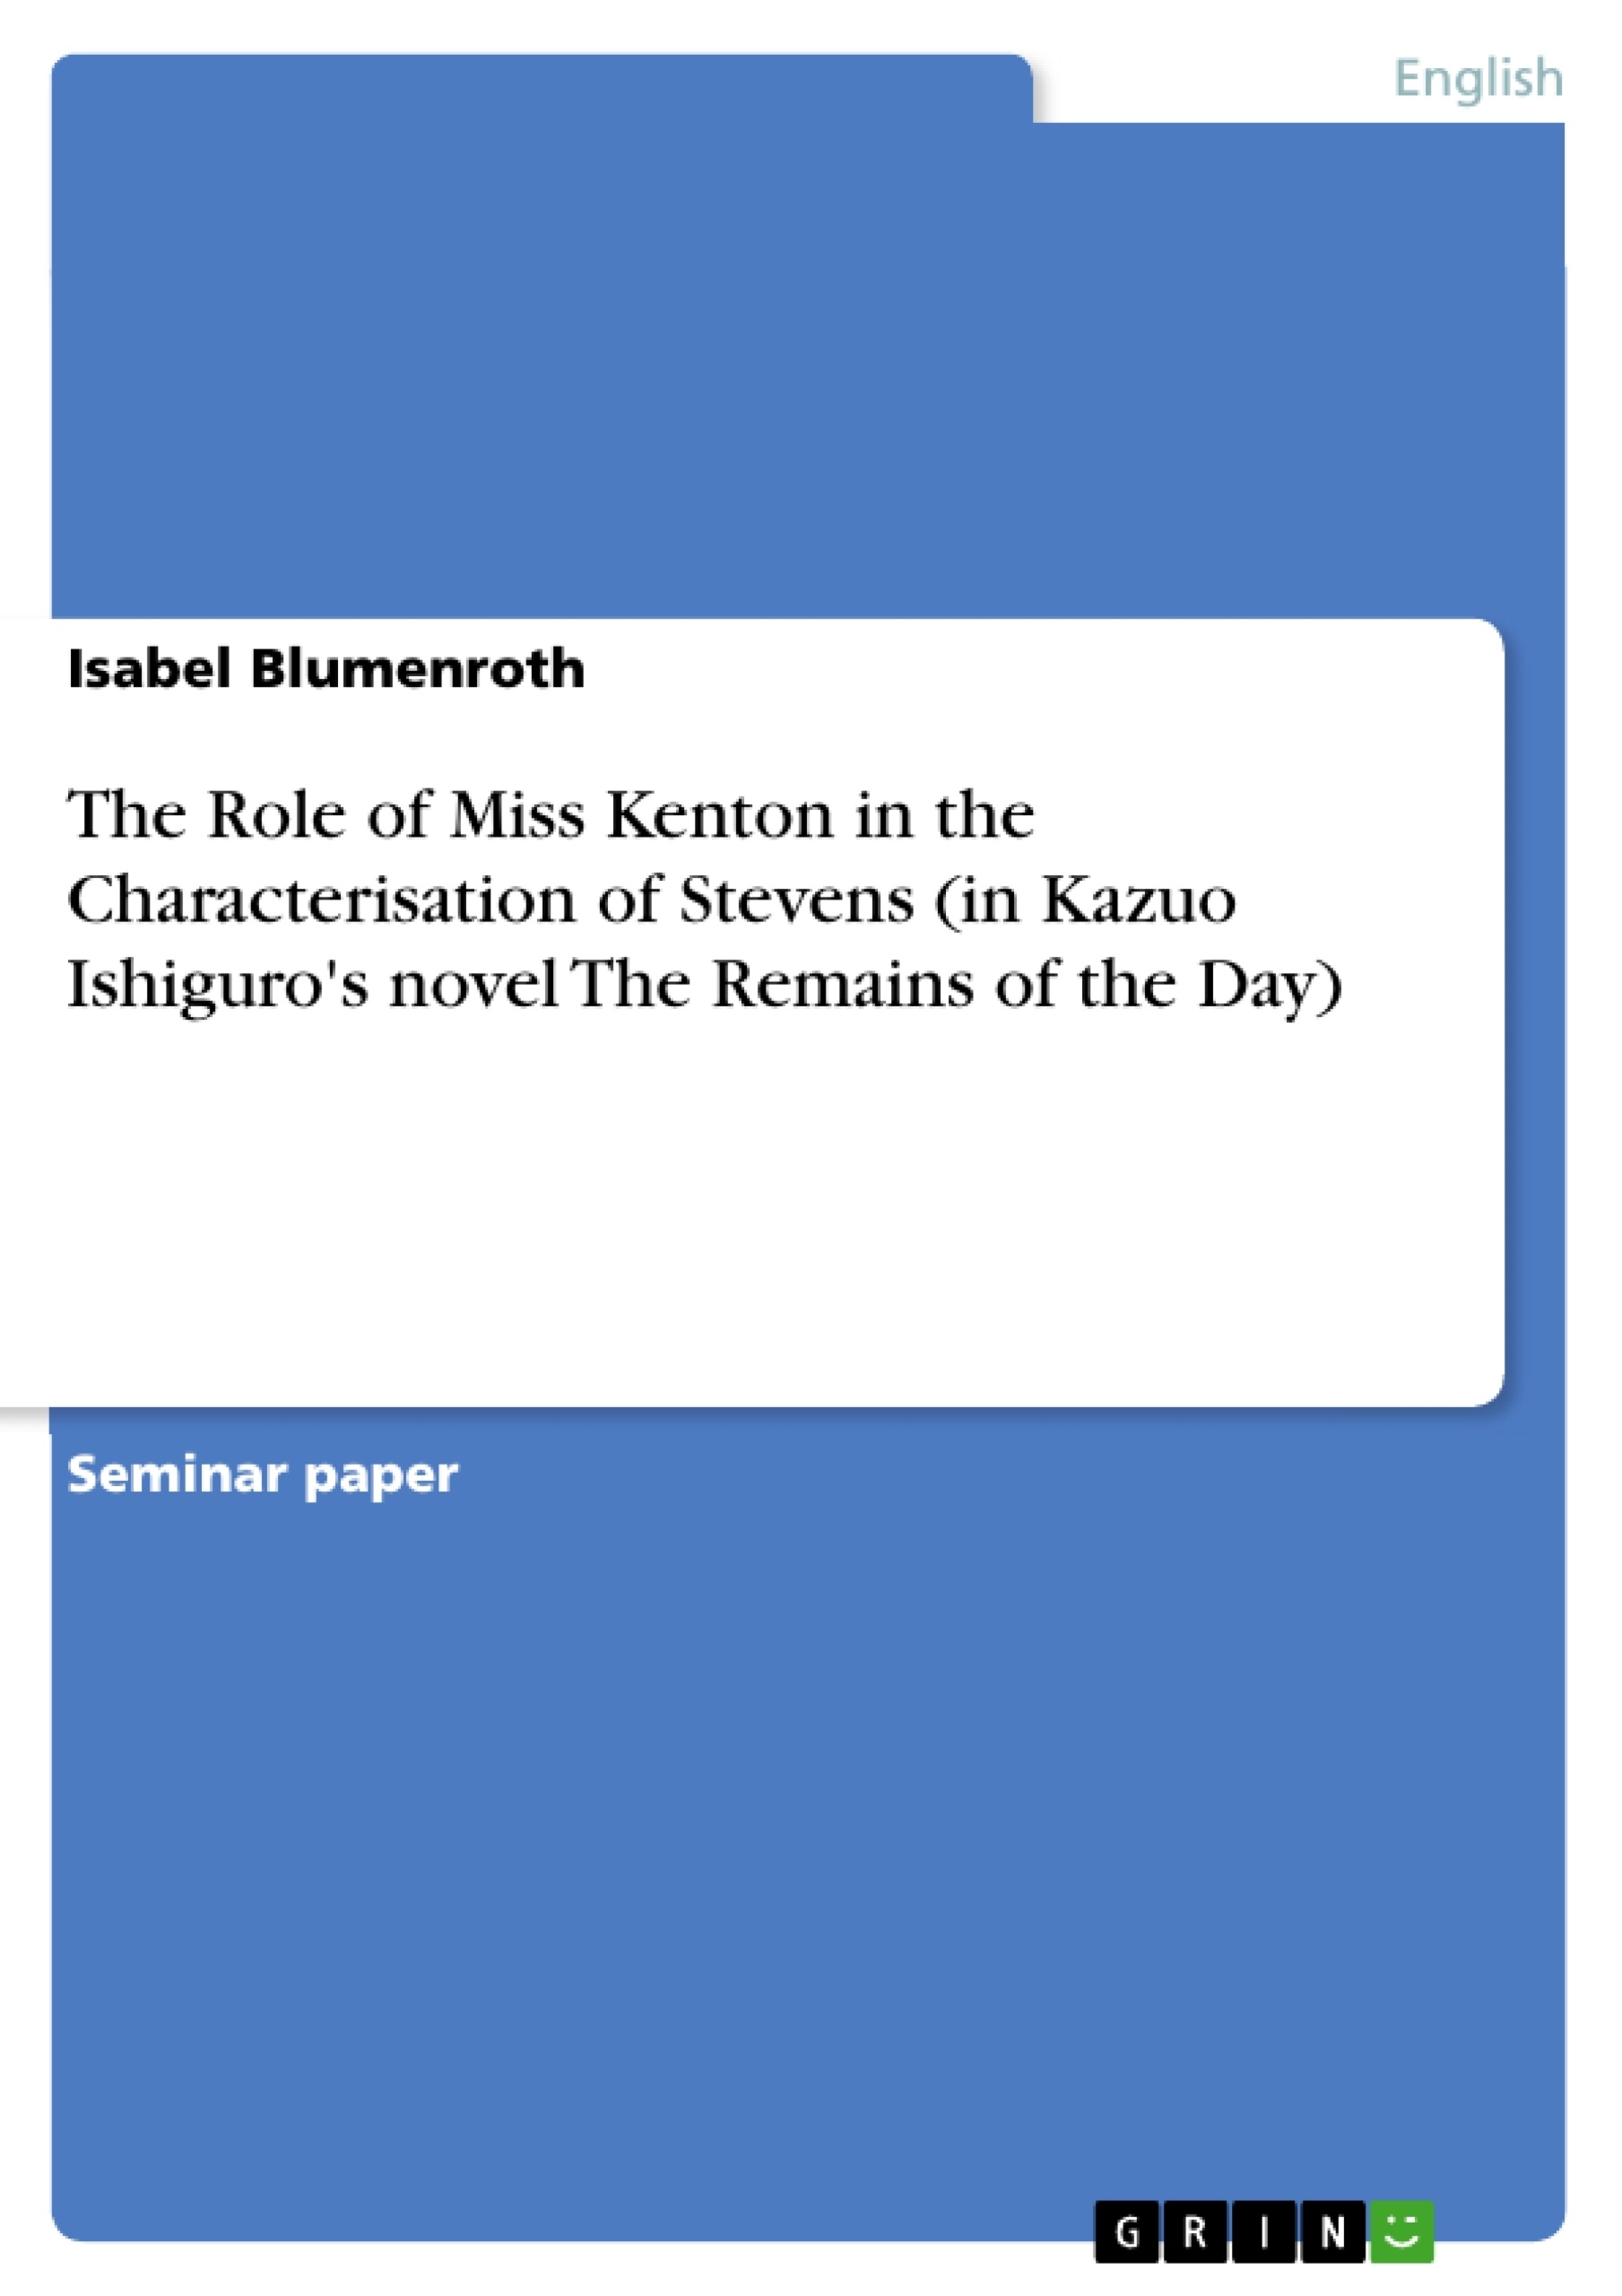 Título: The Role of Miss Kenton in the Characterisation of Stevens (in Kazuo Ishiguro's novel The Remains of the Day)